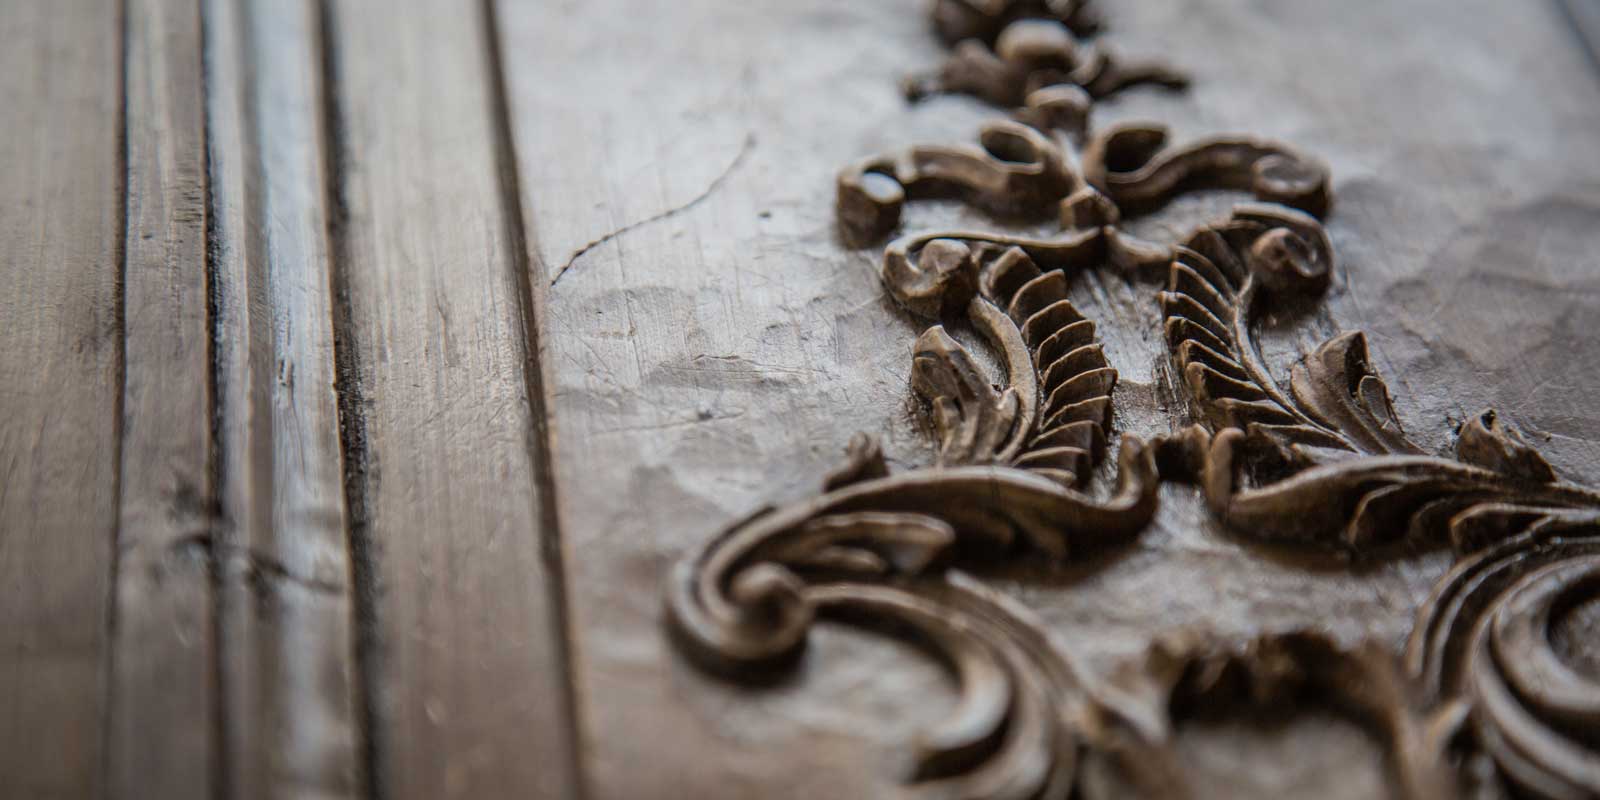 A close up of the intricate details in the wood showing toolmarks from the sculpter